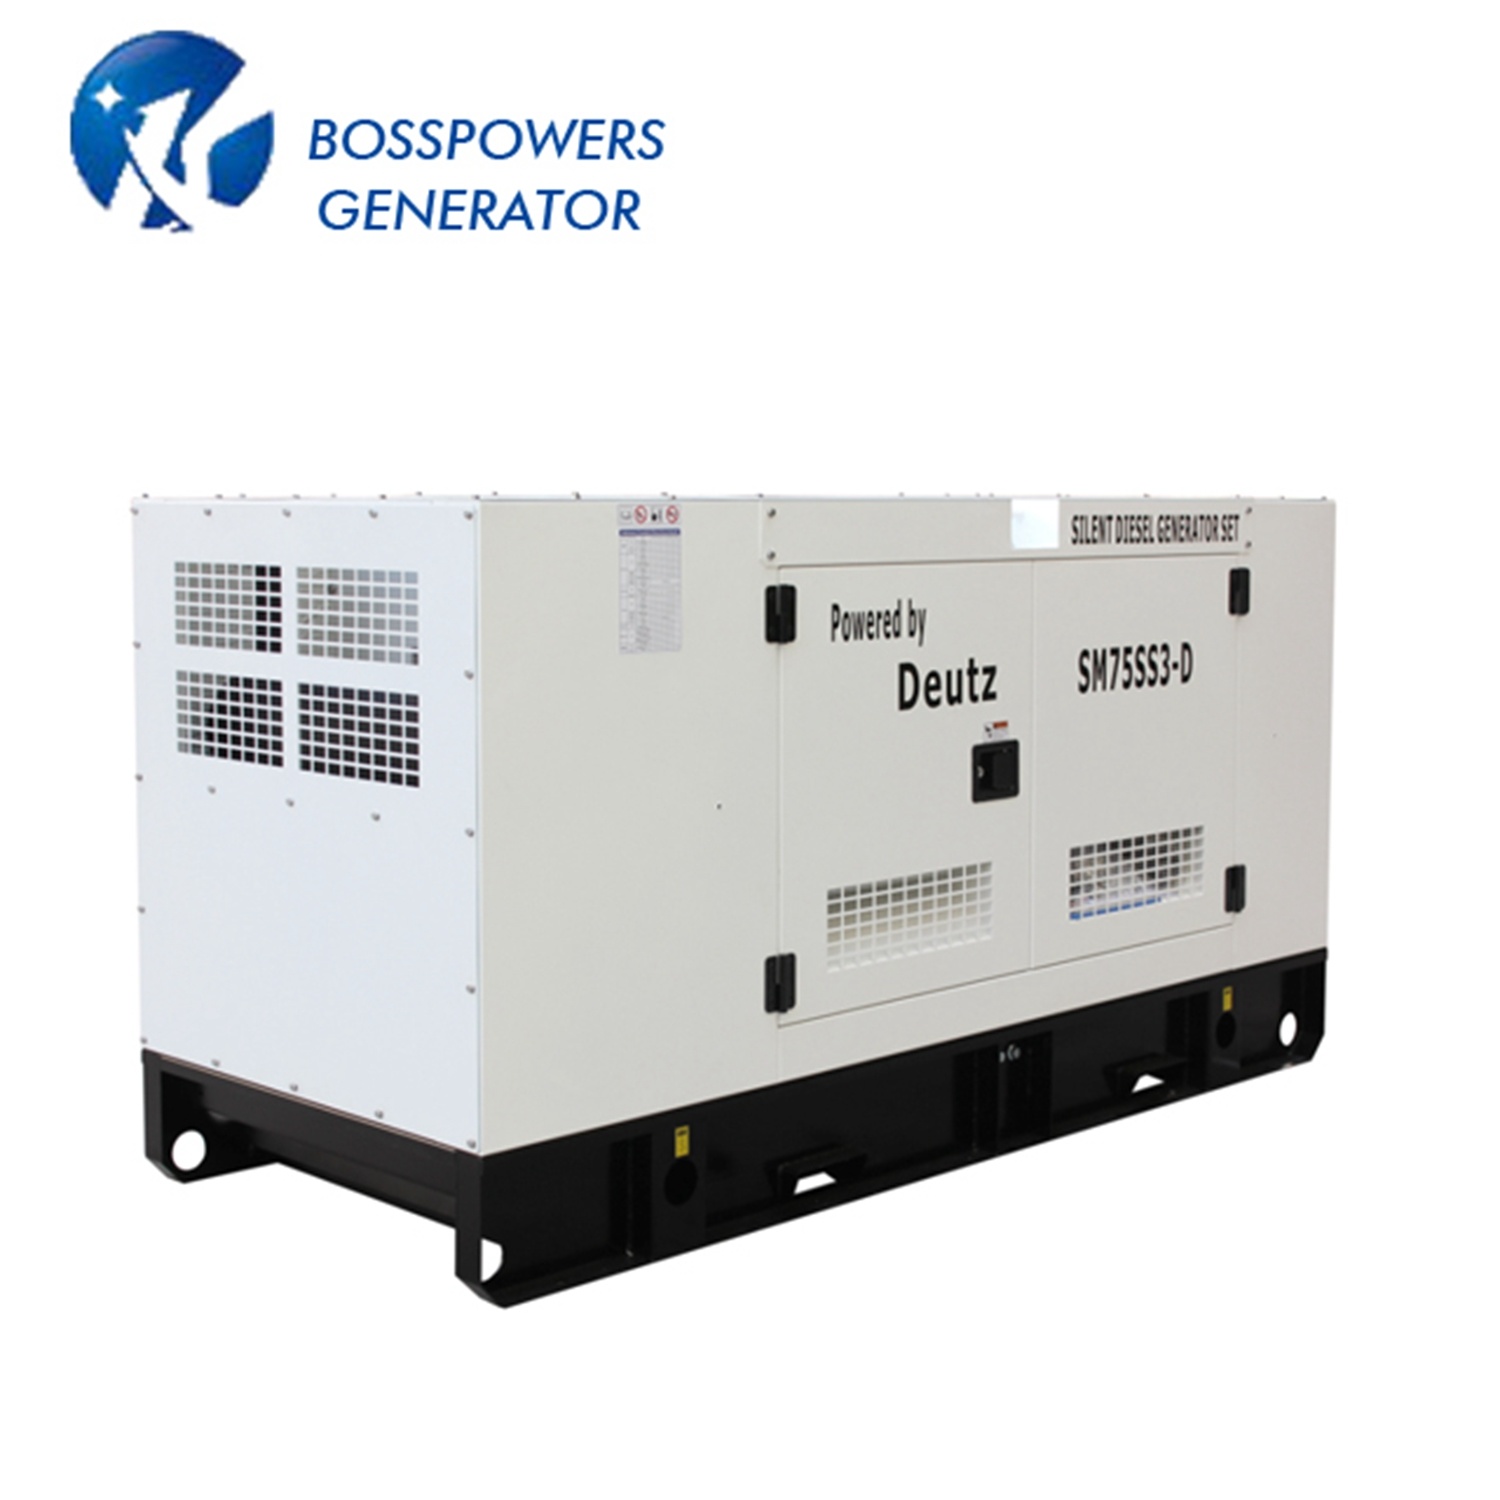 Powered by 6bt5.9-G2 Diesel Generator Water Cooling for South America